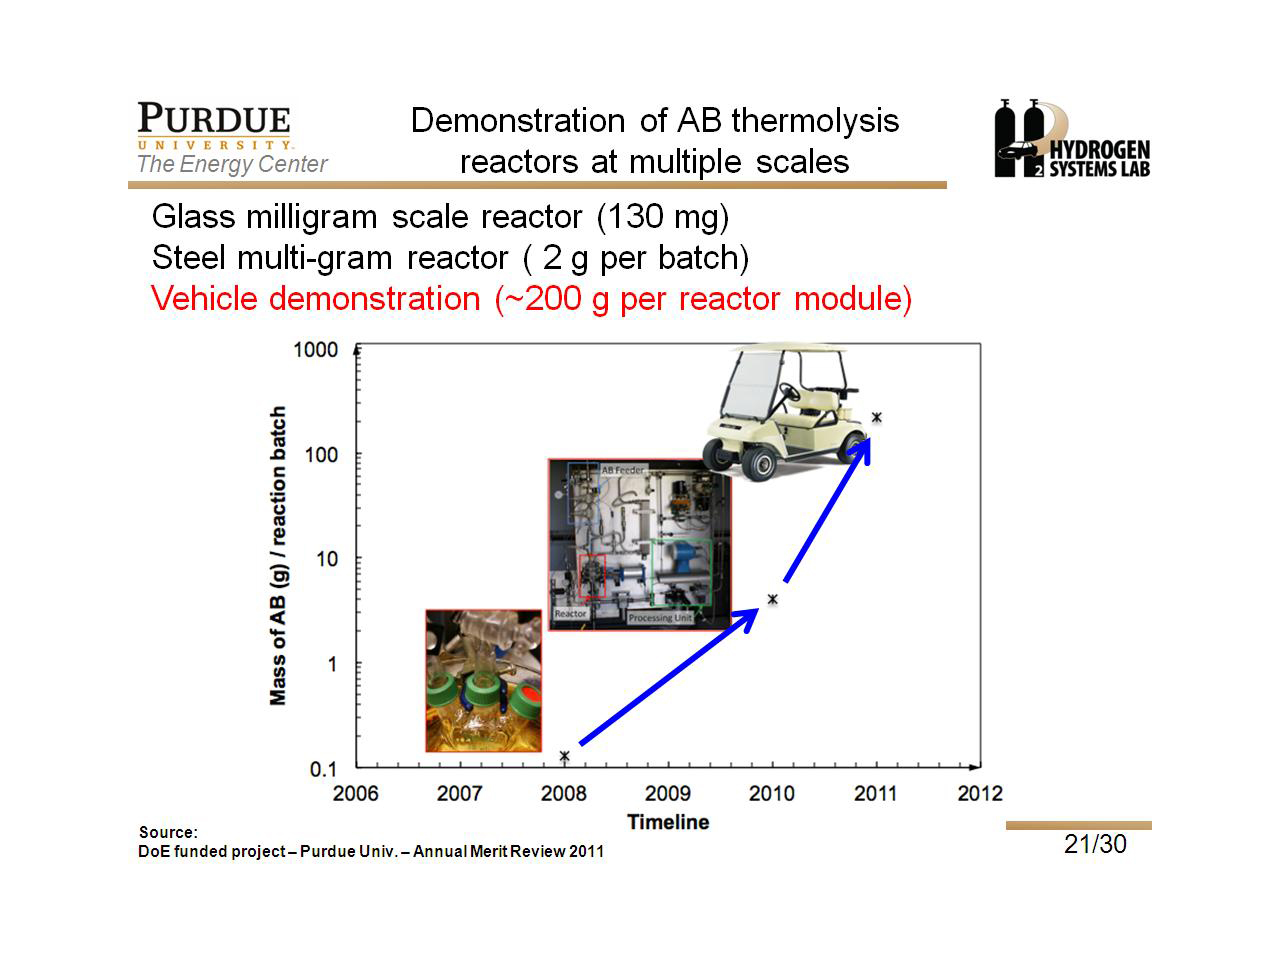 Demonstration of AB thermolysis reactors at multiple scales